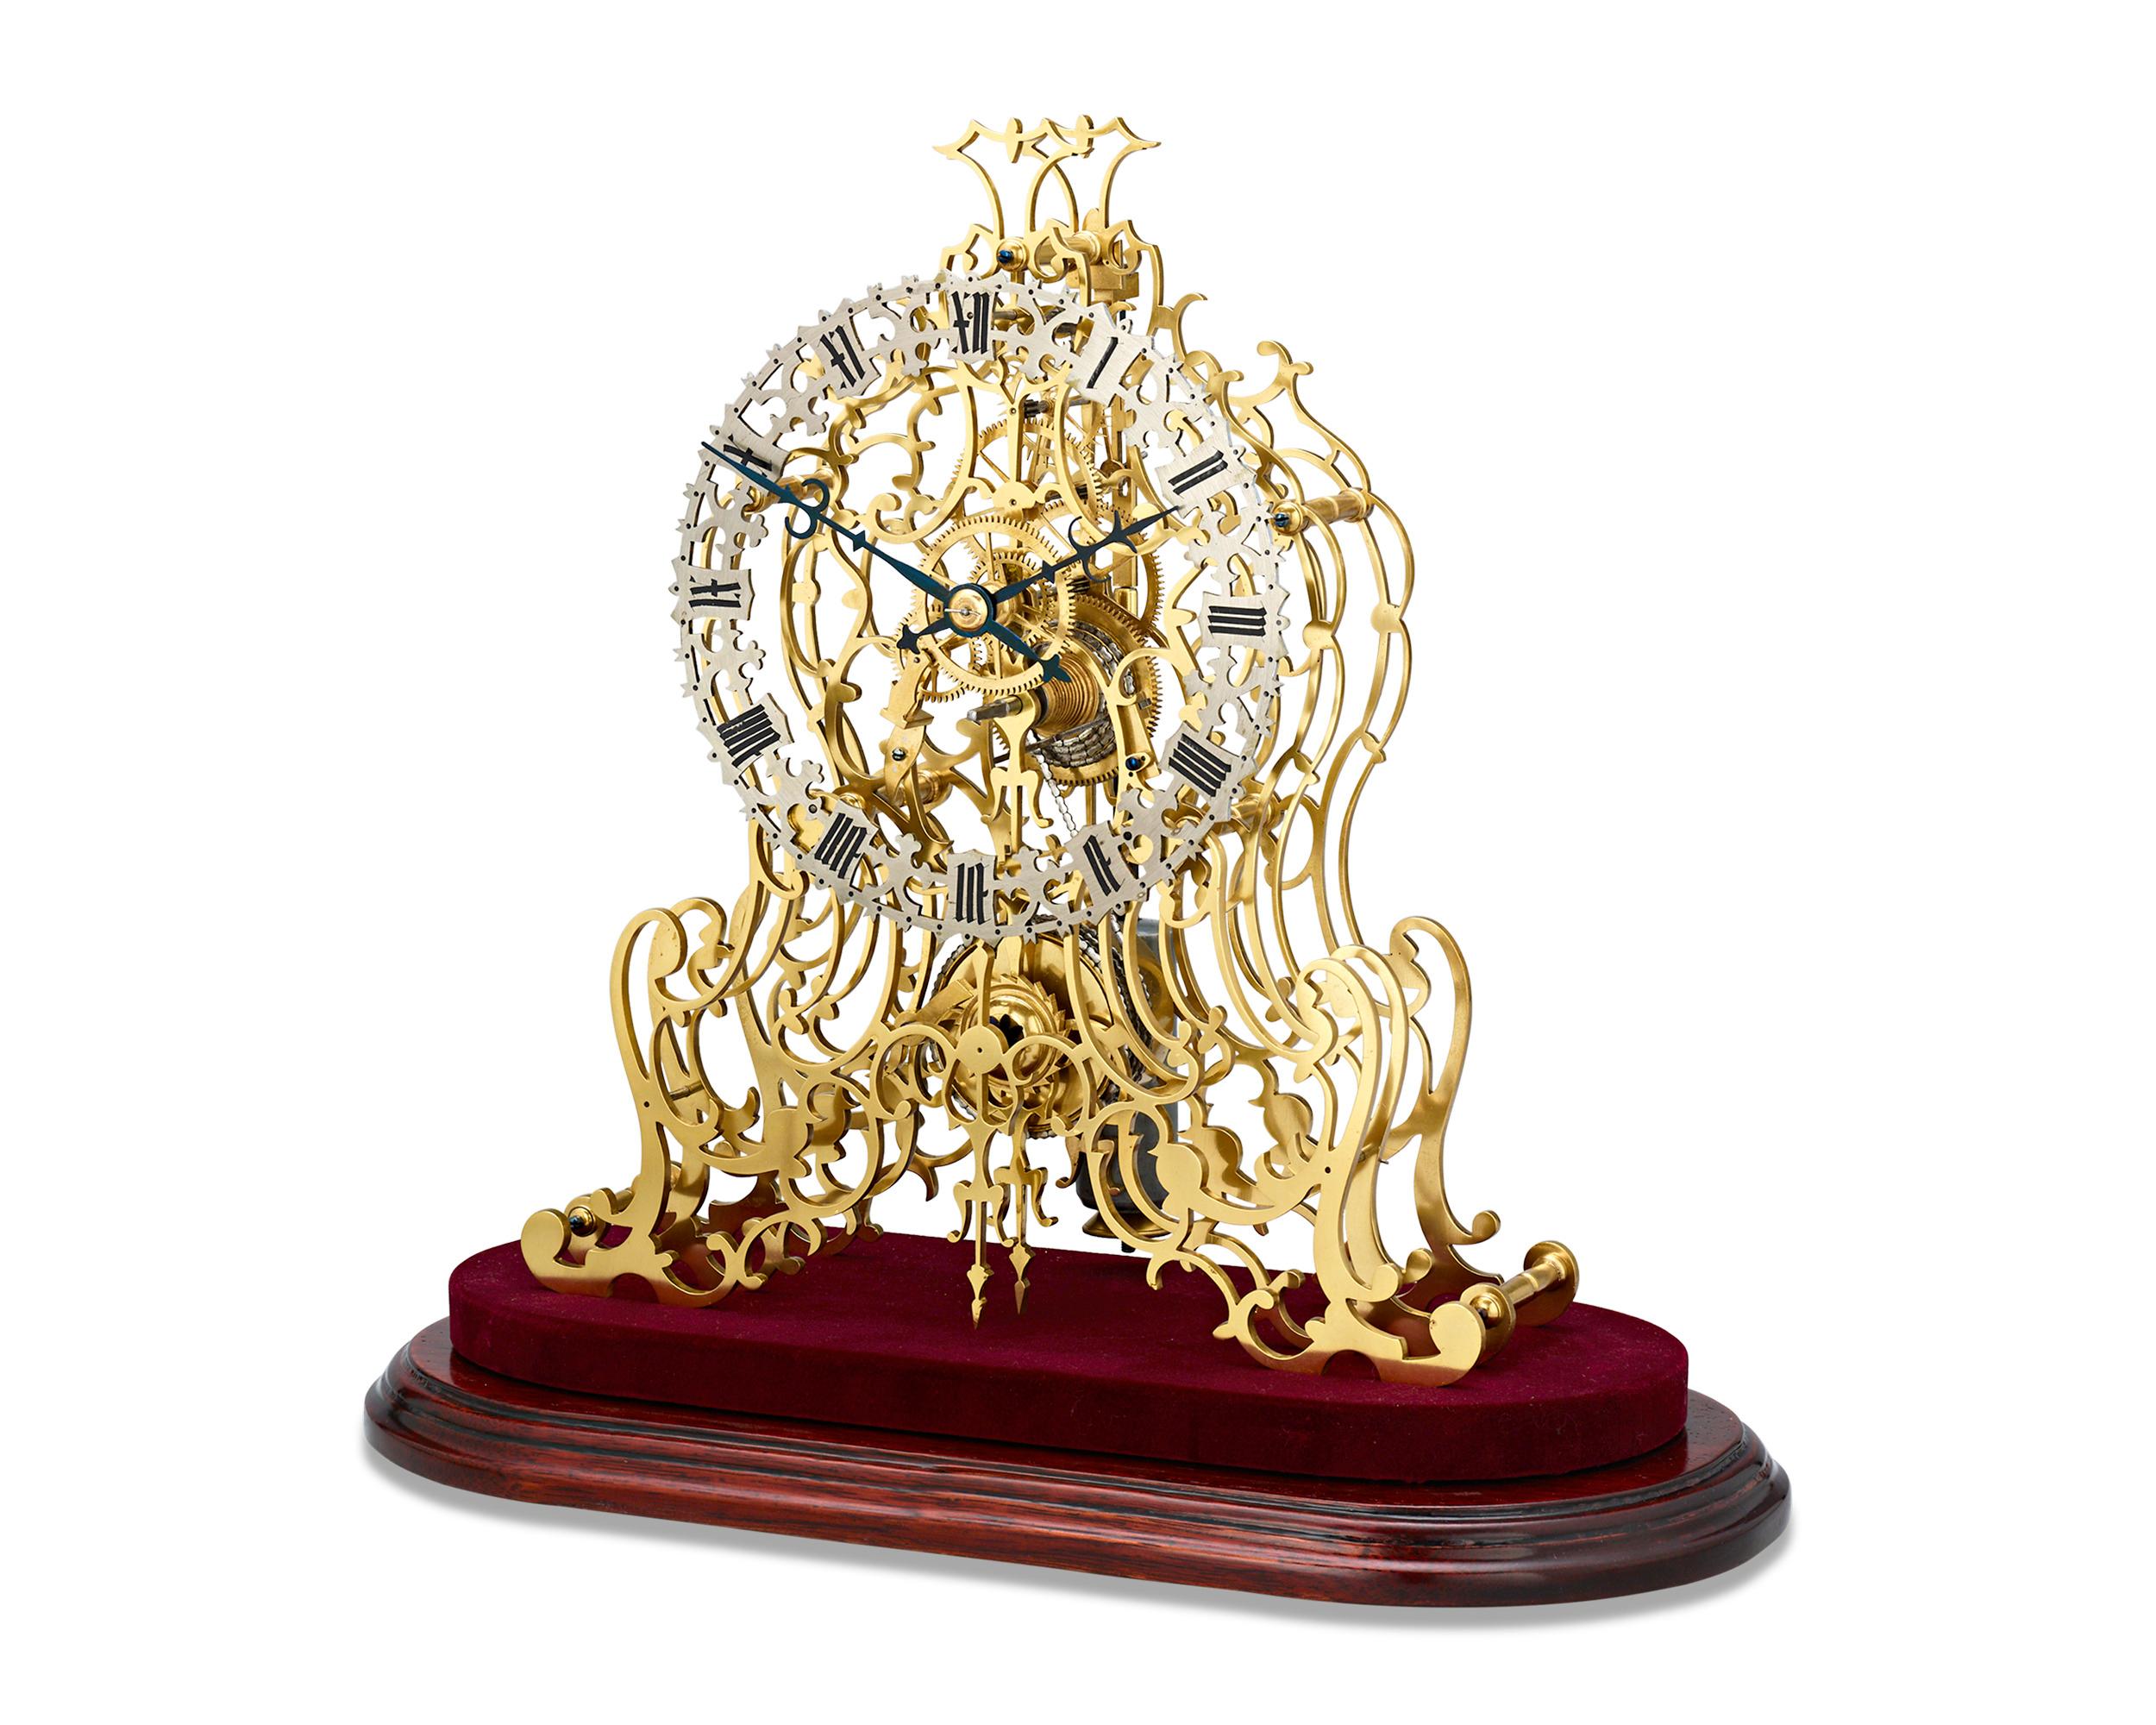 This incredible arabesque skeleton clock is a stellar example by the preeminent English firm of William Frederick Evans of Handsworth, Birmingham. This horologic masterpiece is in complete, working condition, boasting an amazing brass triple-layer